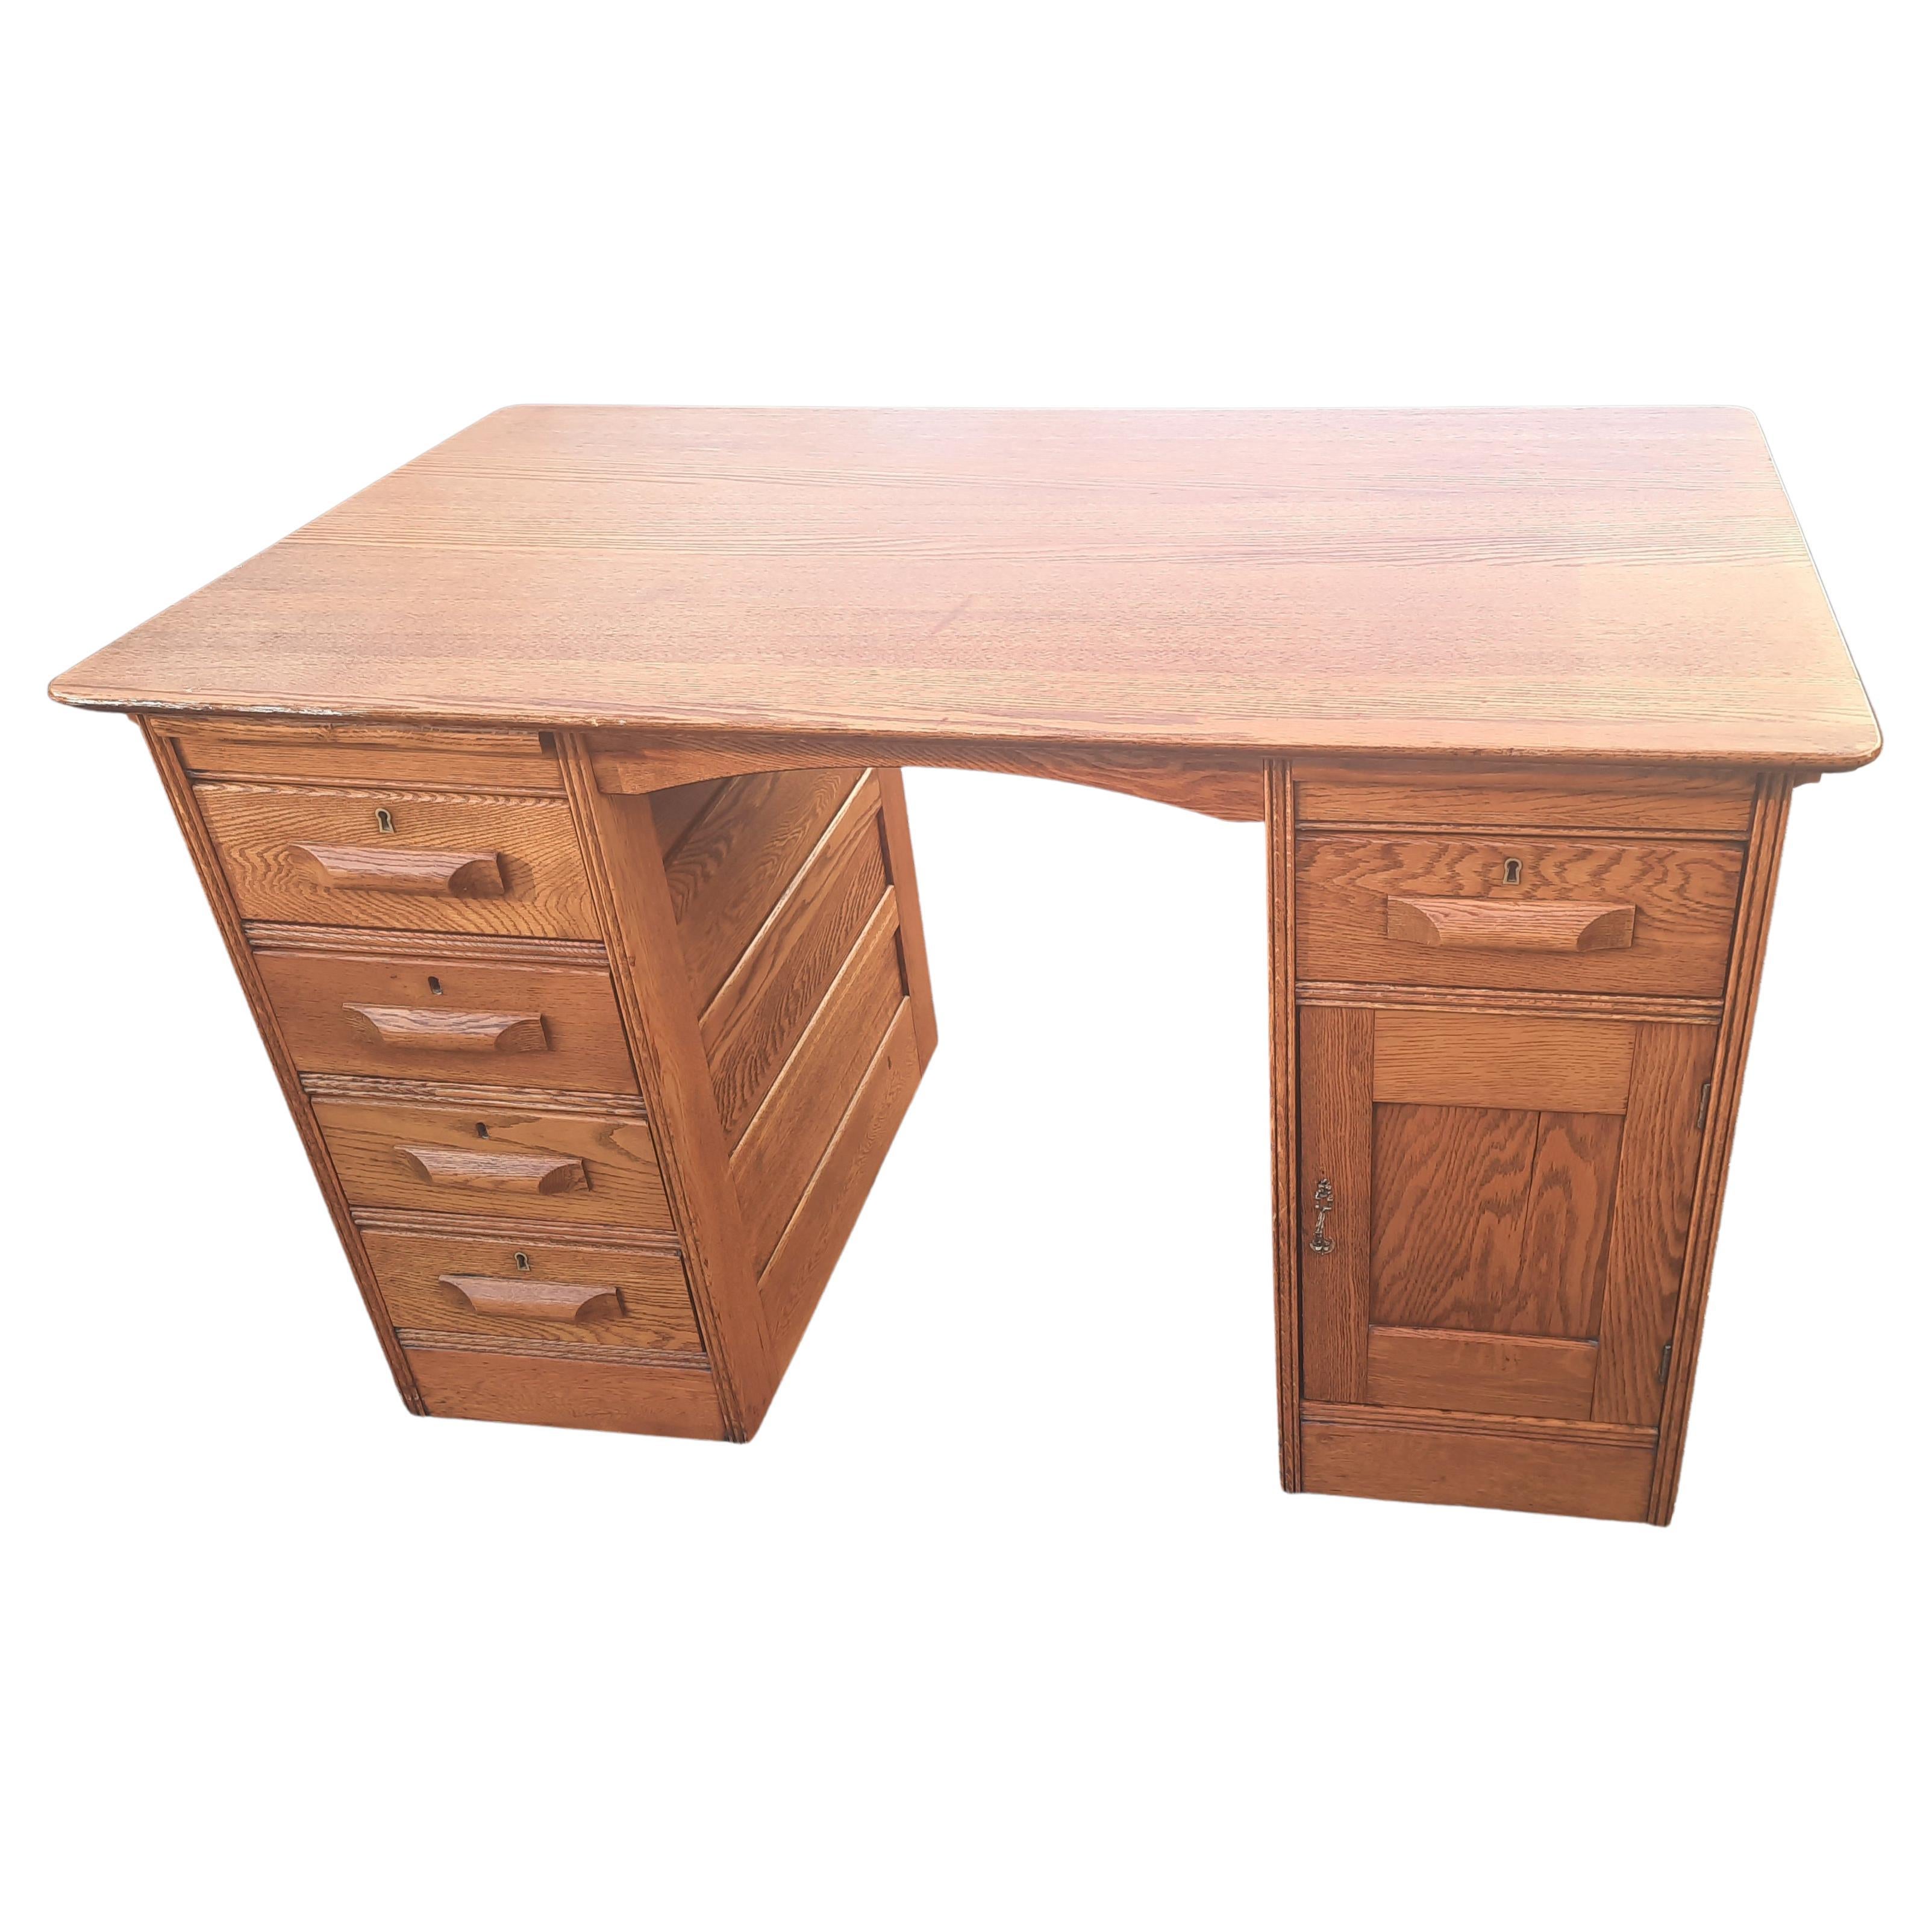 Handcrafted Solid Oak Partners Desk Writing Desk on Wheels, circa 1960 For Sale 3